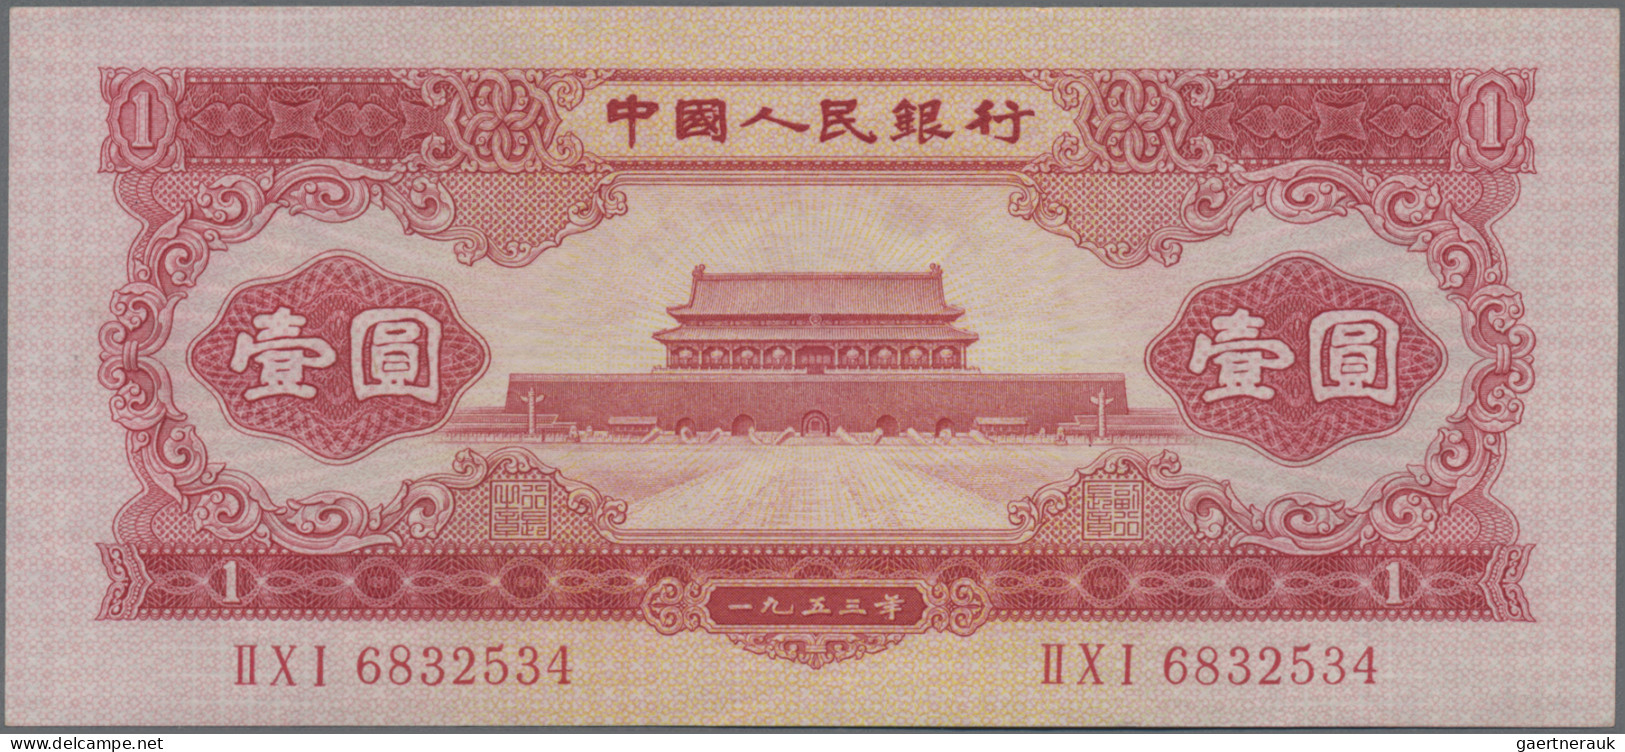 China: Peoples Republic Of China 1953 Second Series Set With 4 Banknotes Compris - China